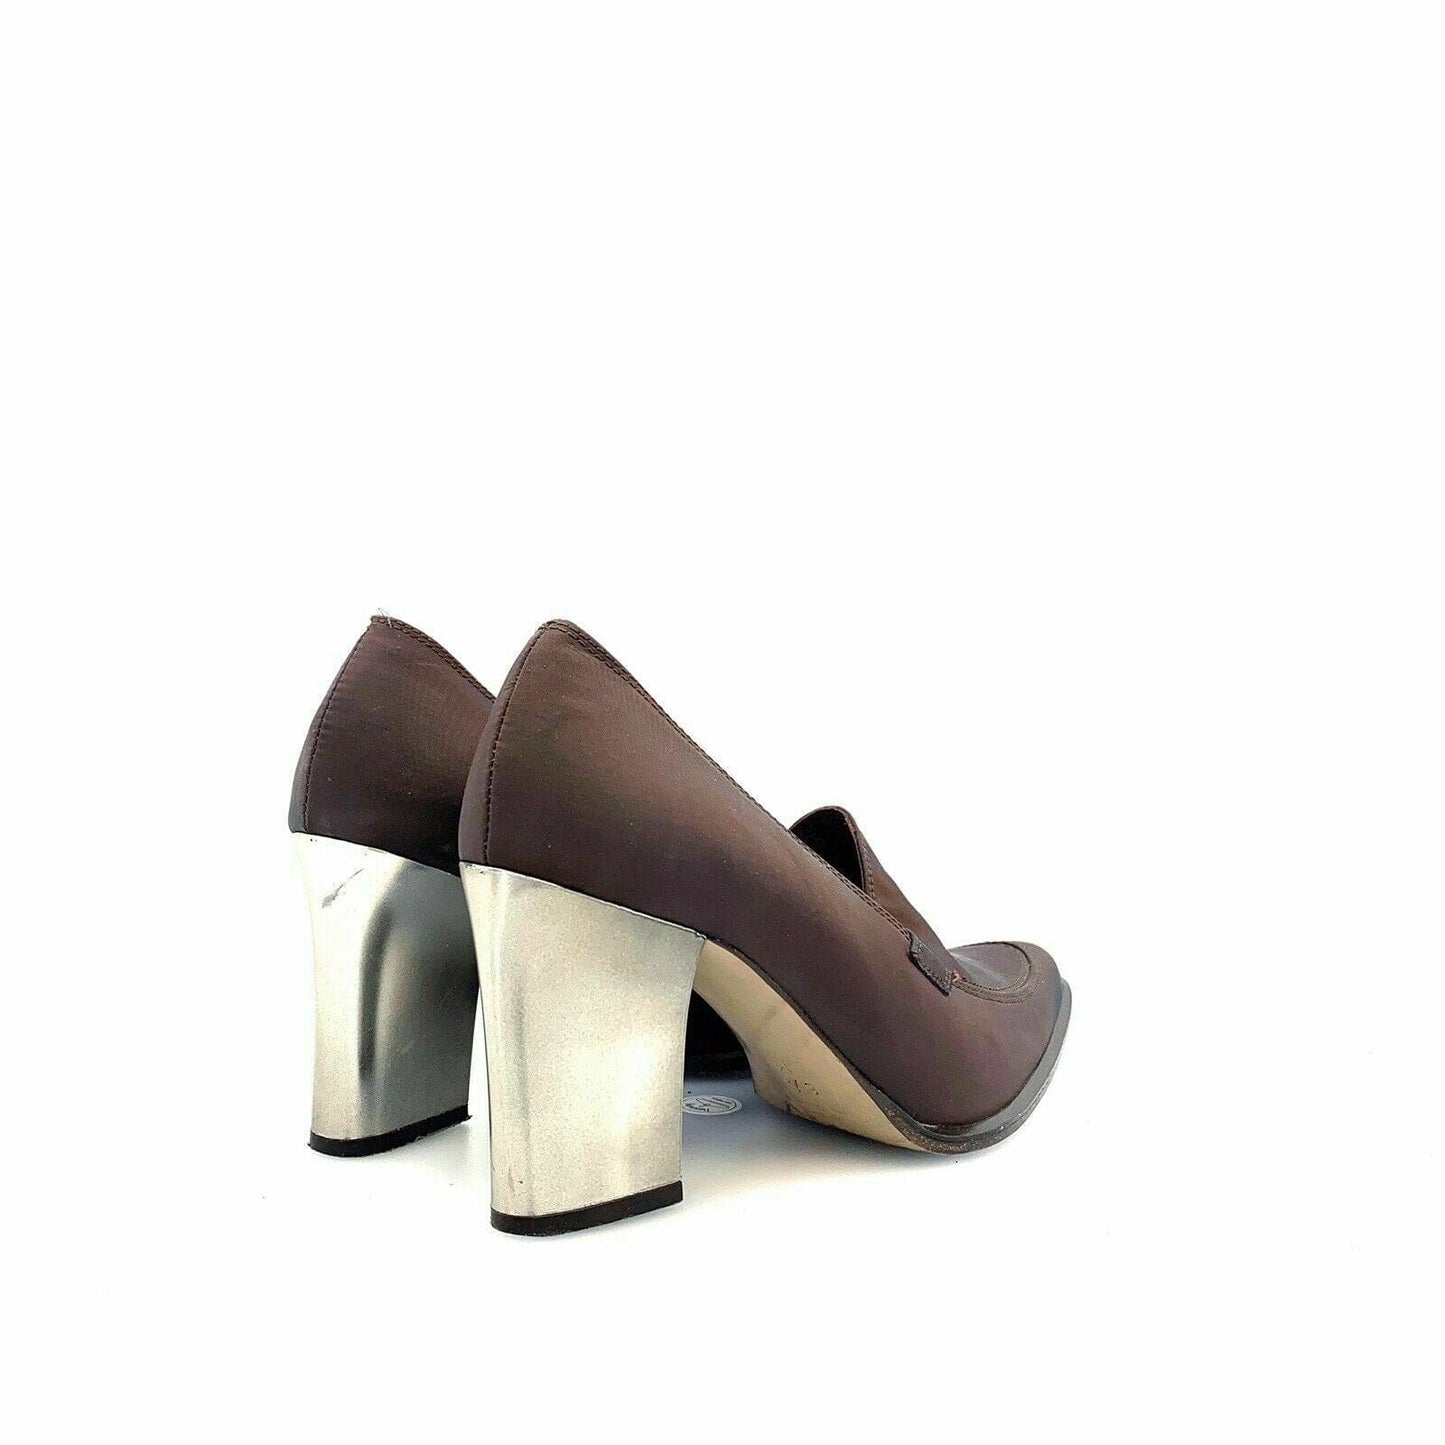 Enzo Angiolini Womens Satin Pointed Toe Metallic Heel Shoes, Brown - Size 6.5M